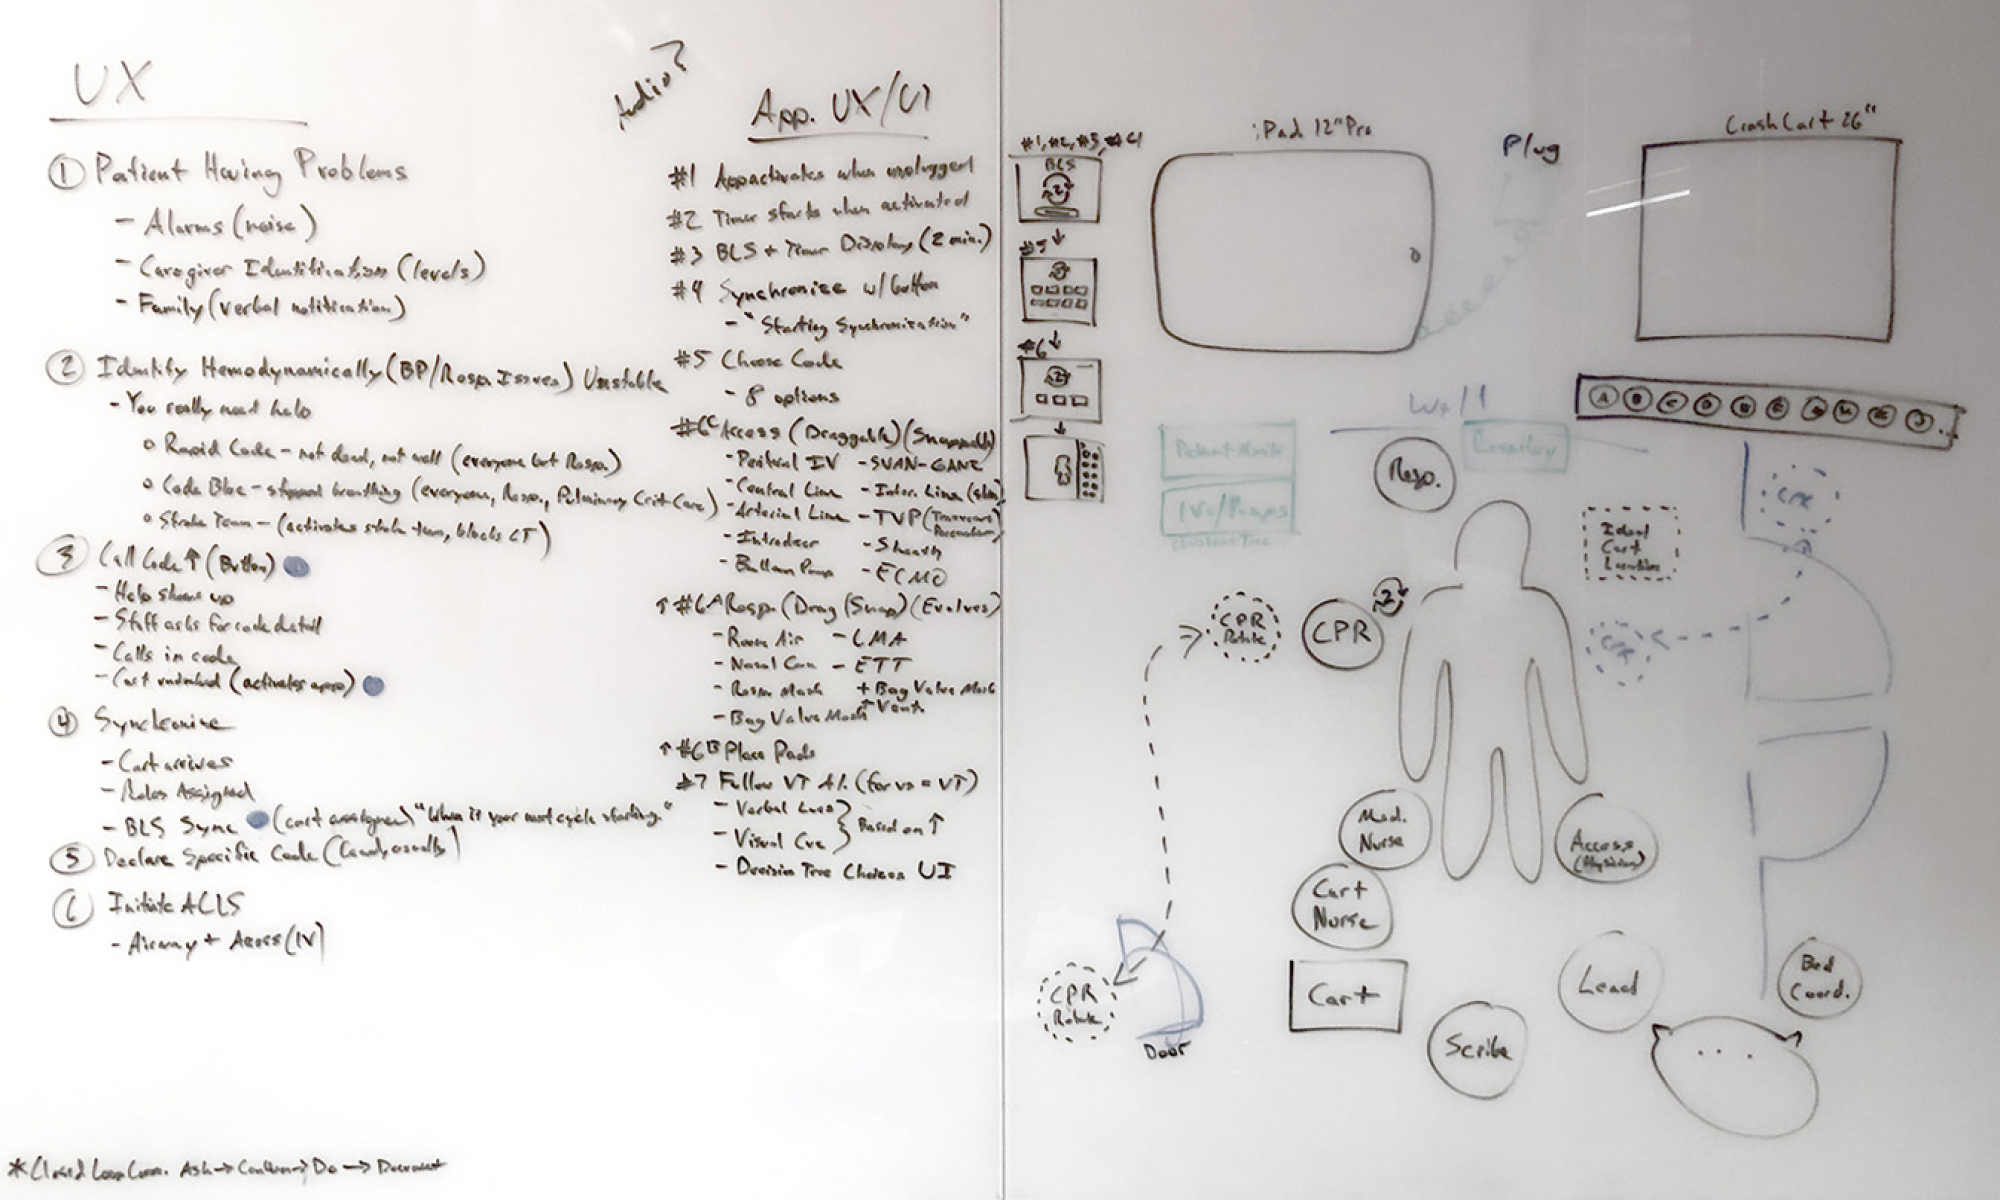 Project image for Synchronize, Process Image of a UX Brainstorm.